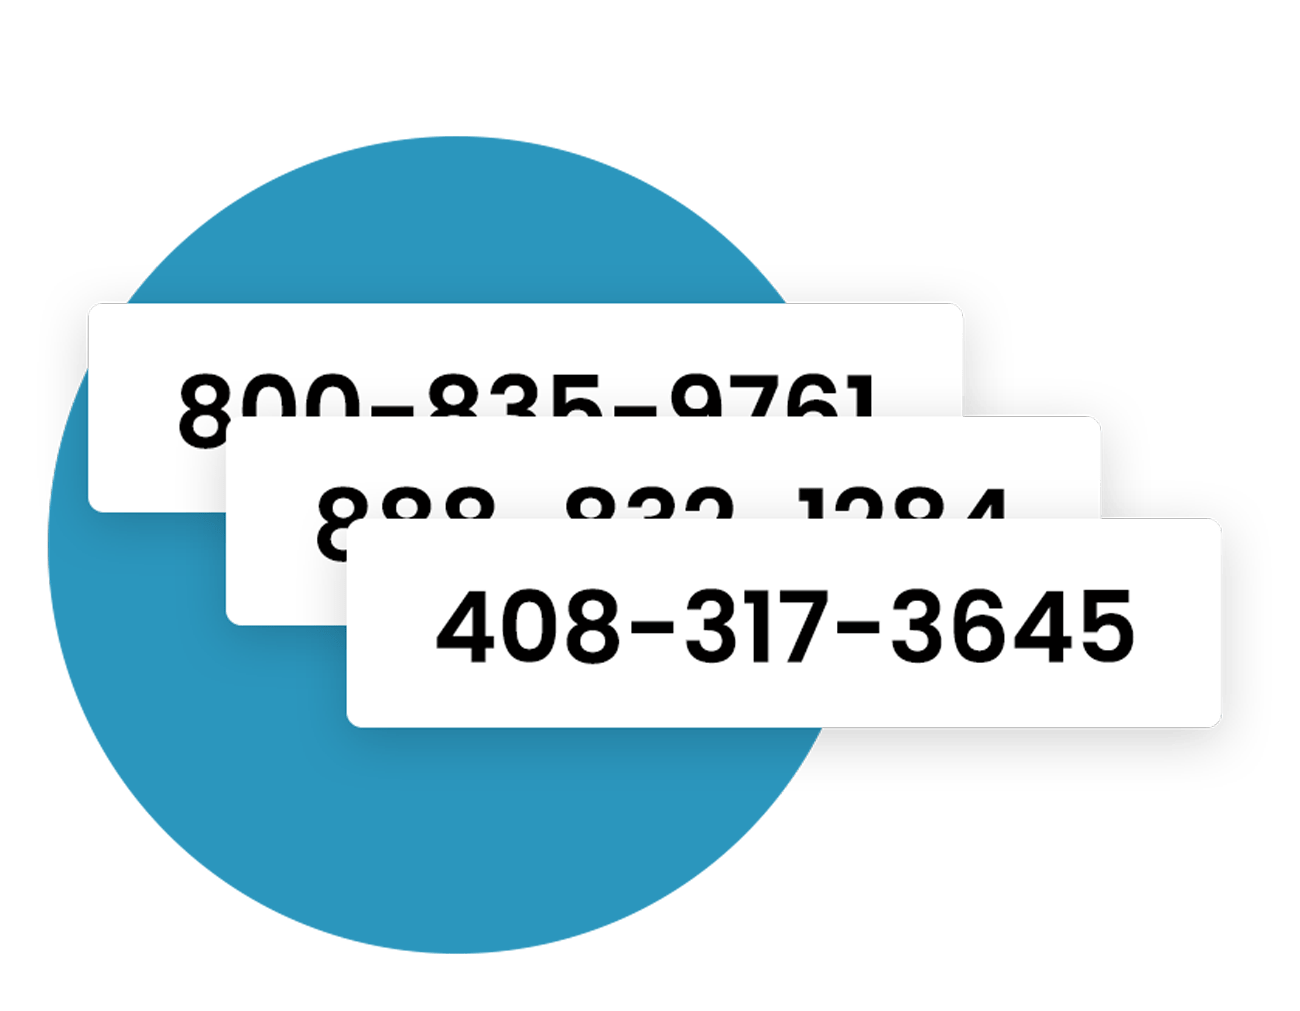 Business phone numbers: looking for local numbers? Choose from thousands of local phone numbers.